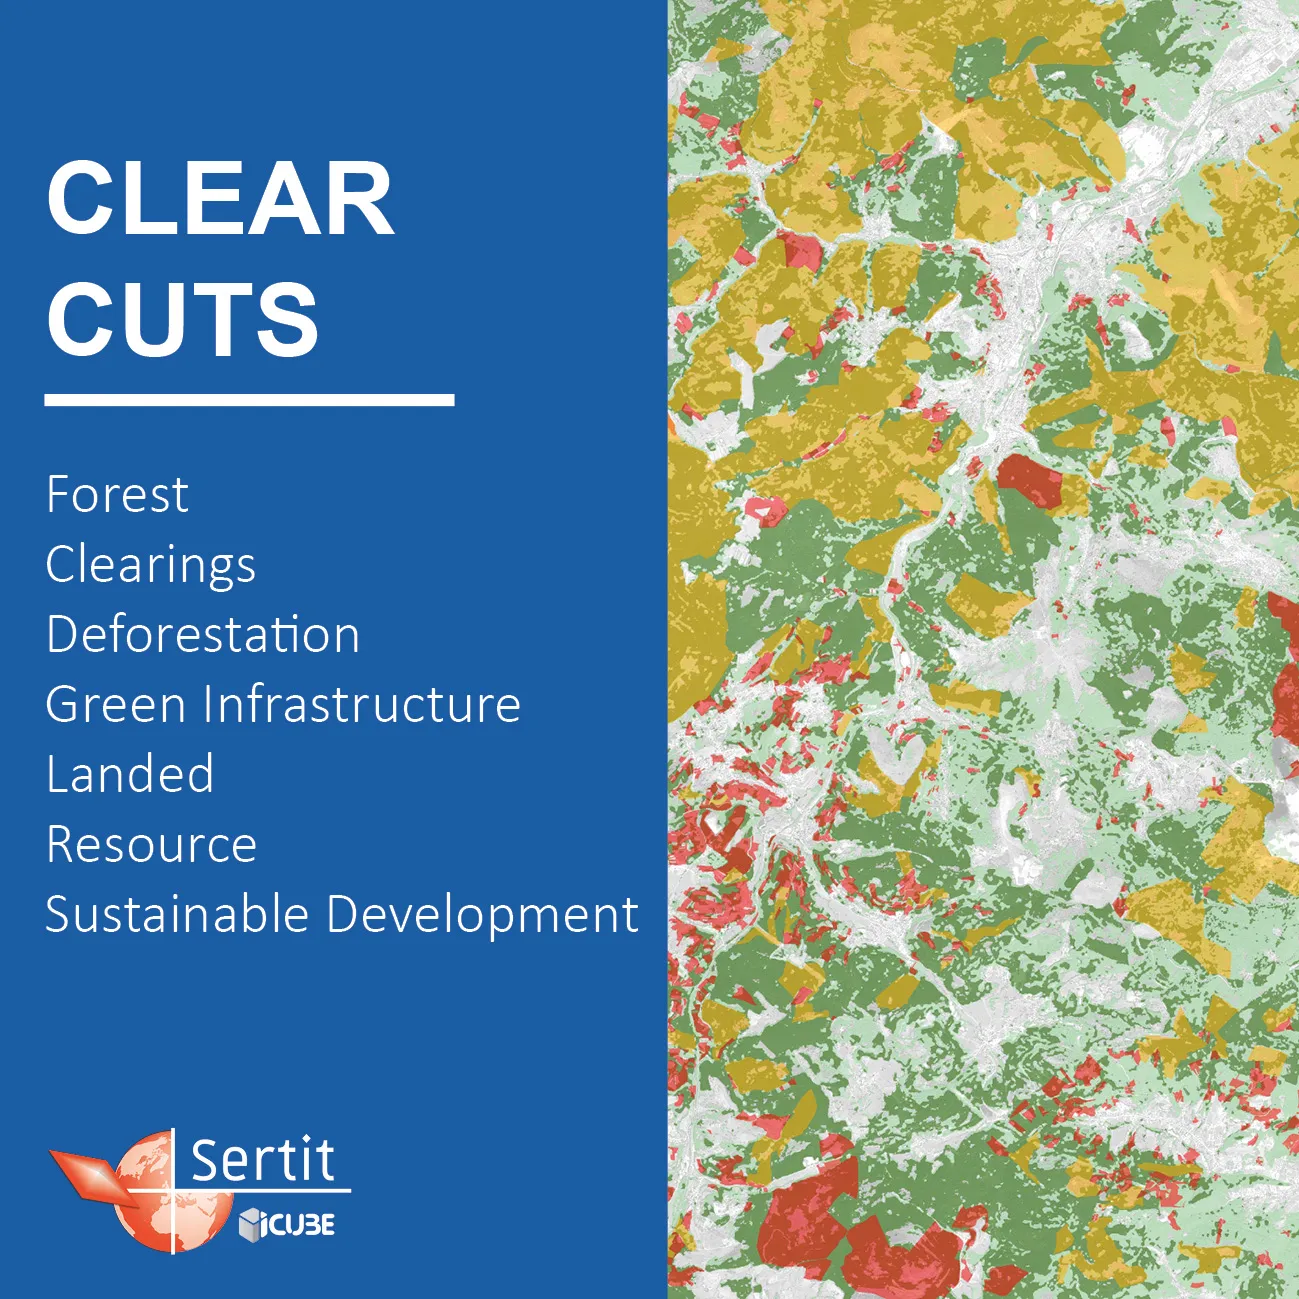 Clear Cuts: Forest, Clearings, Deforestation, Green Infrastructure, Landed, Resource, Sustainable Development